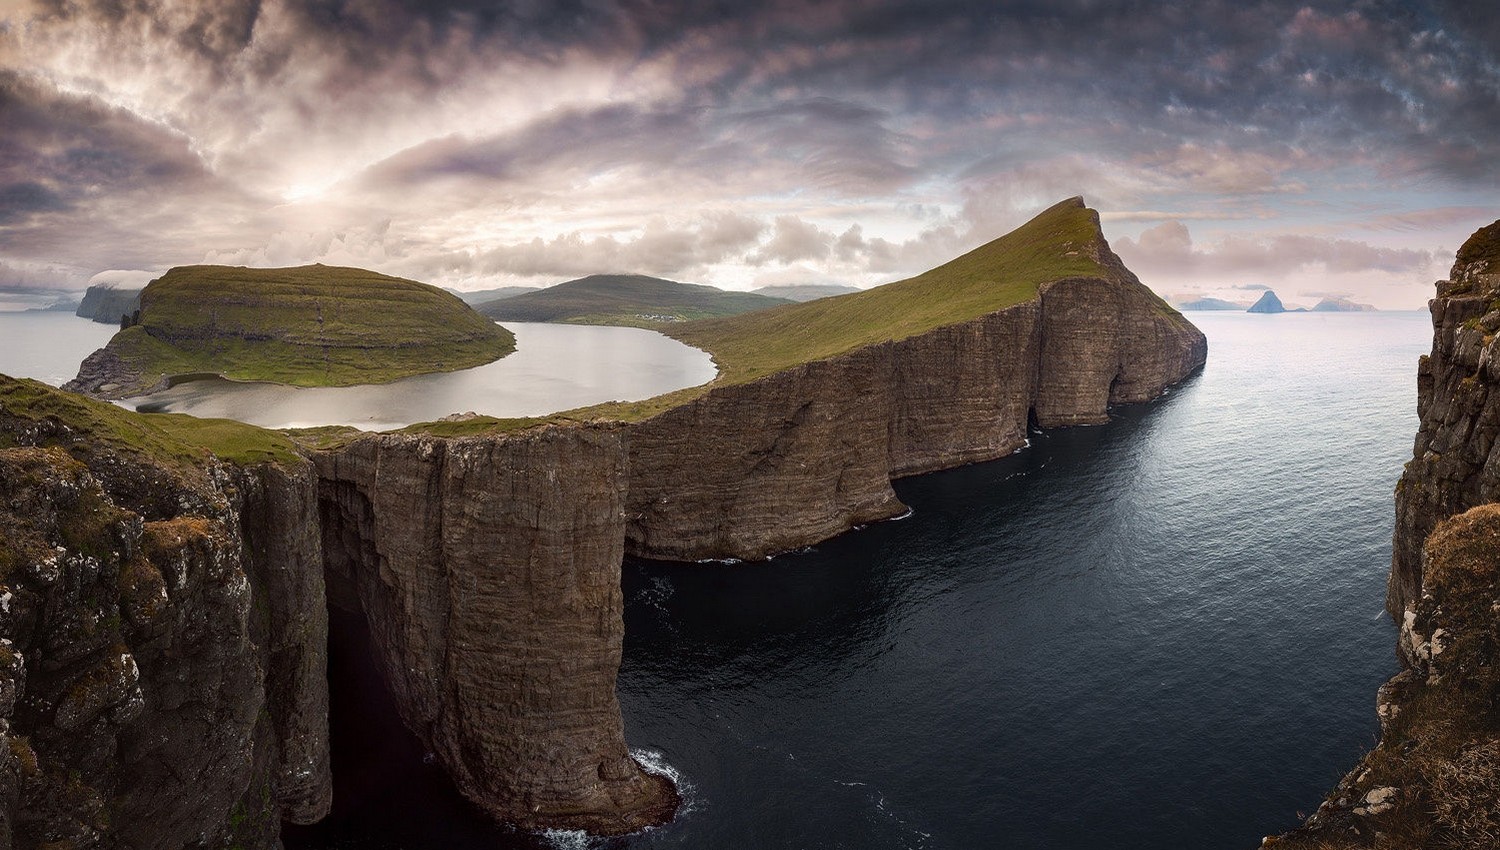 General 1500x850 nature photography landscape cliff sea mountains island clouds sunset Faroe Islands Denmark